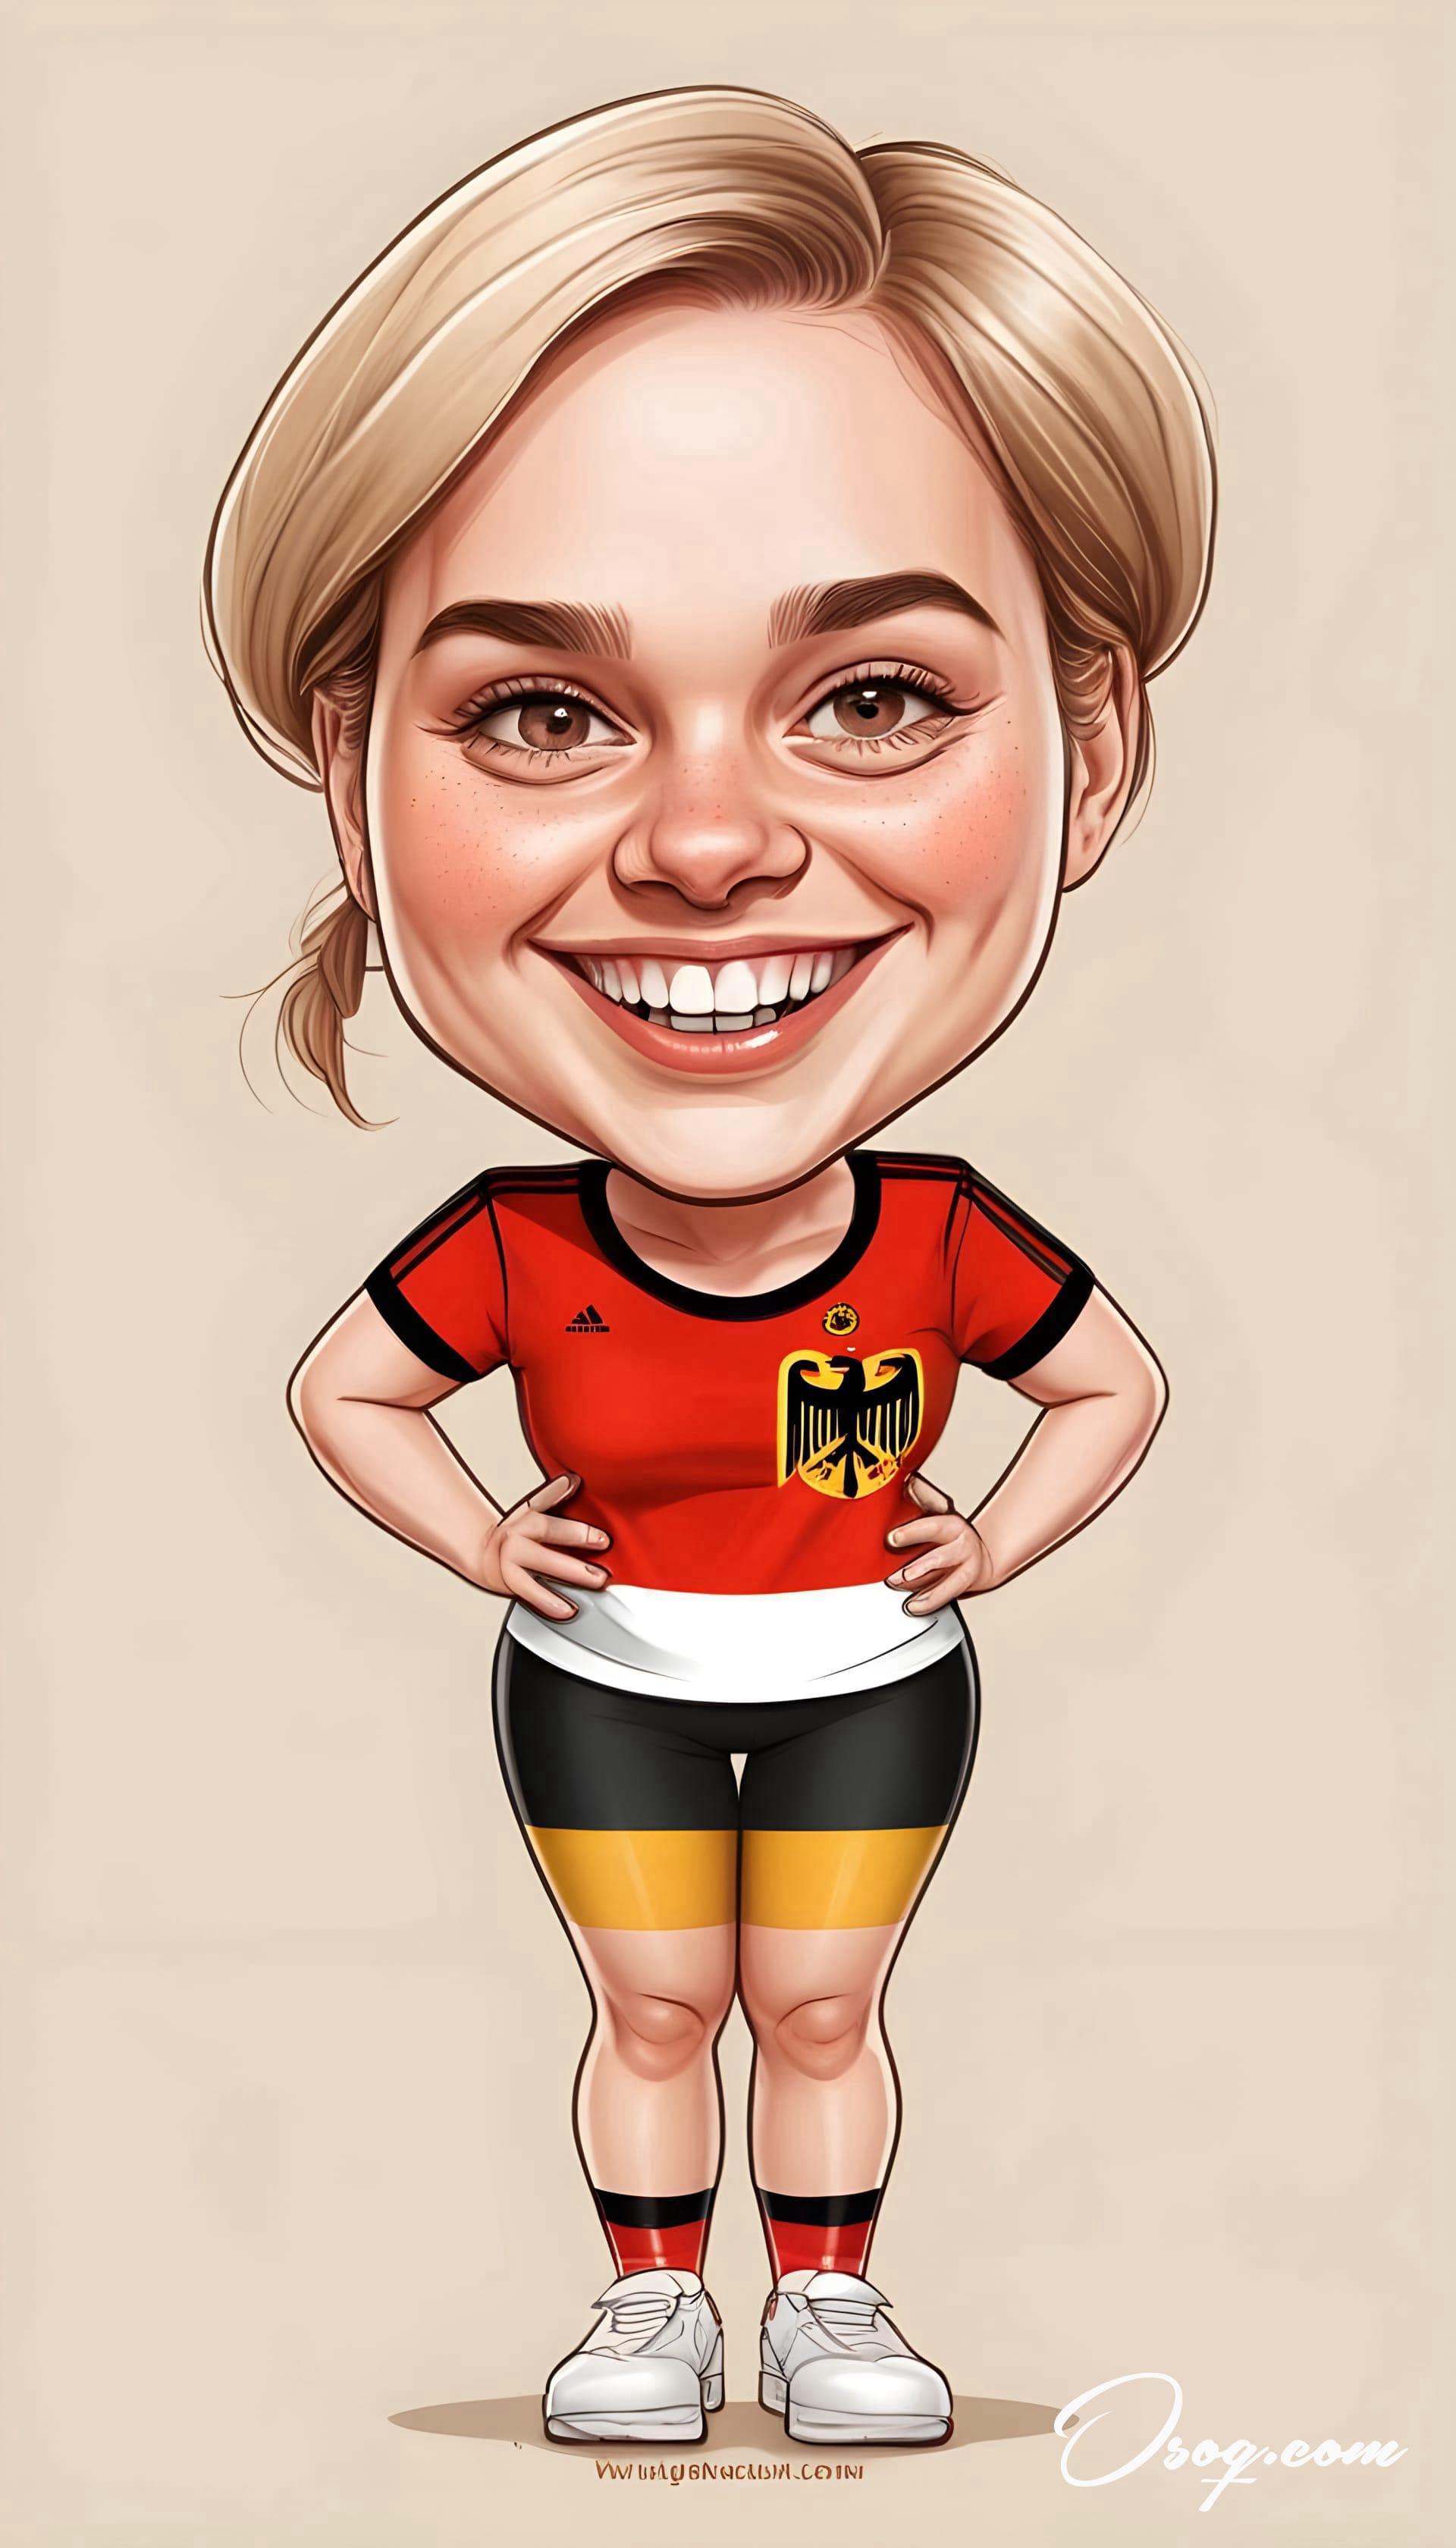 Germany caricature 07